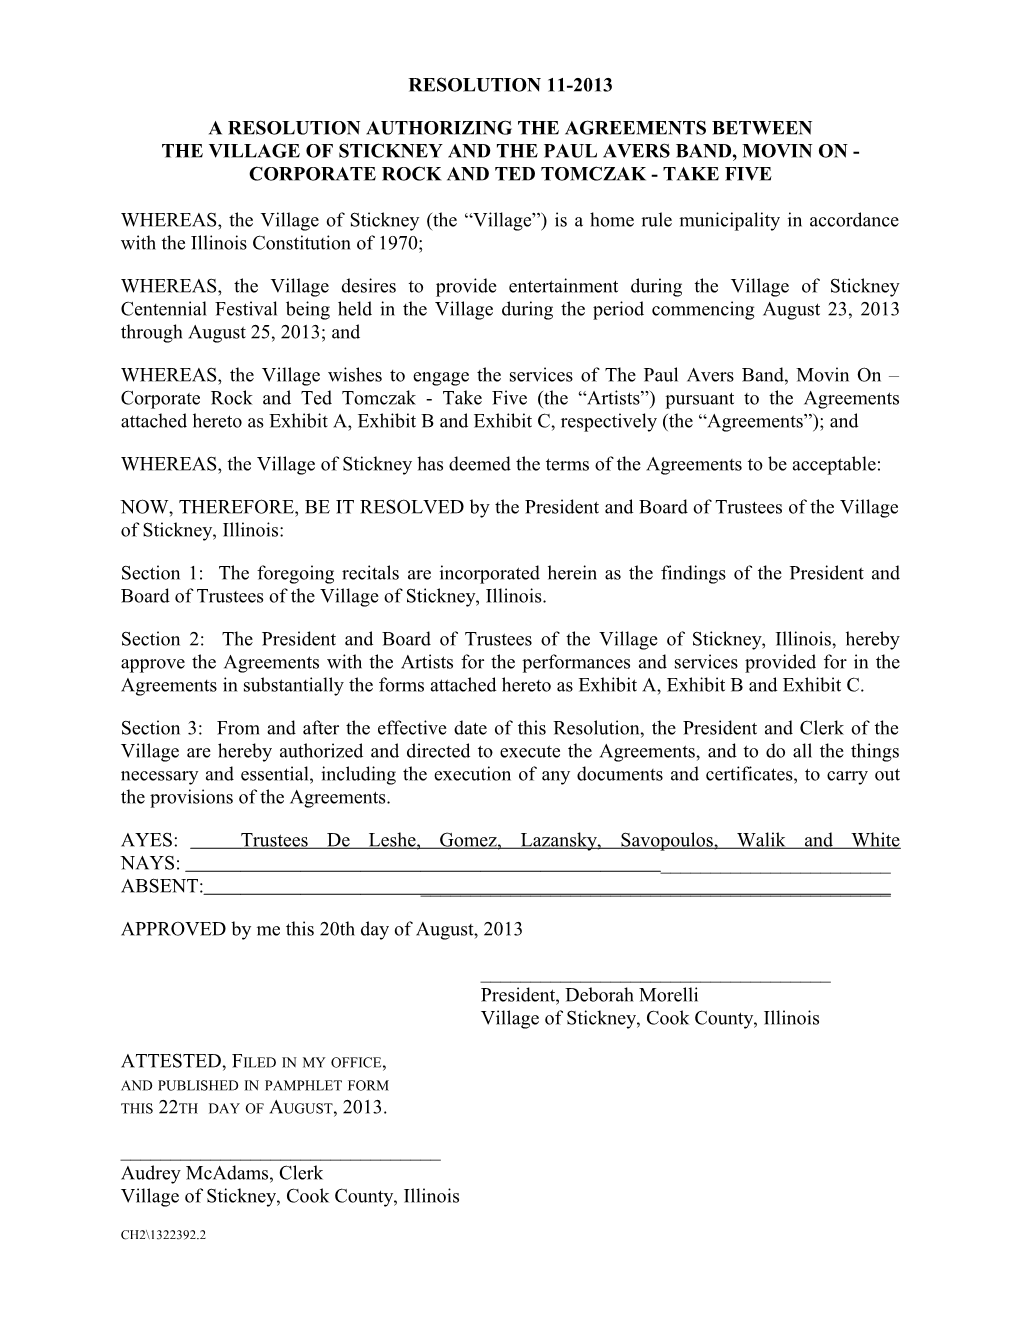 A Resolution Authorizing the Agreements Between the Village of Stickney and the Paul Avers